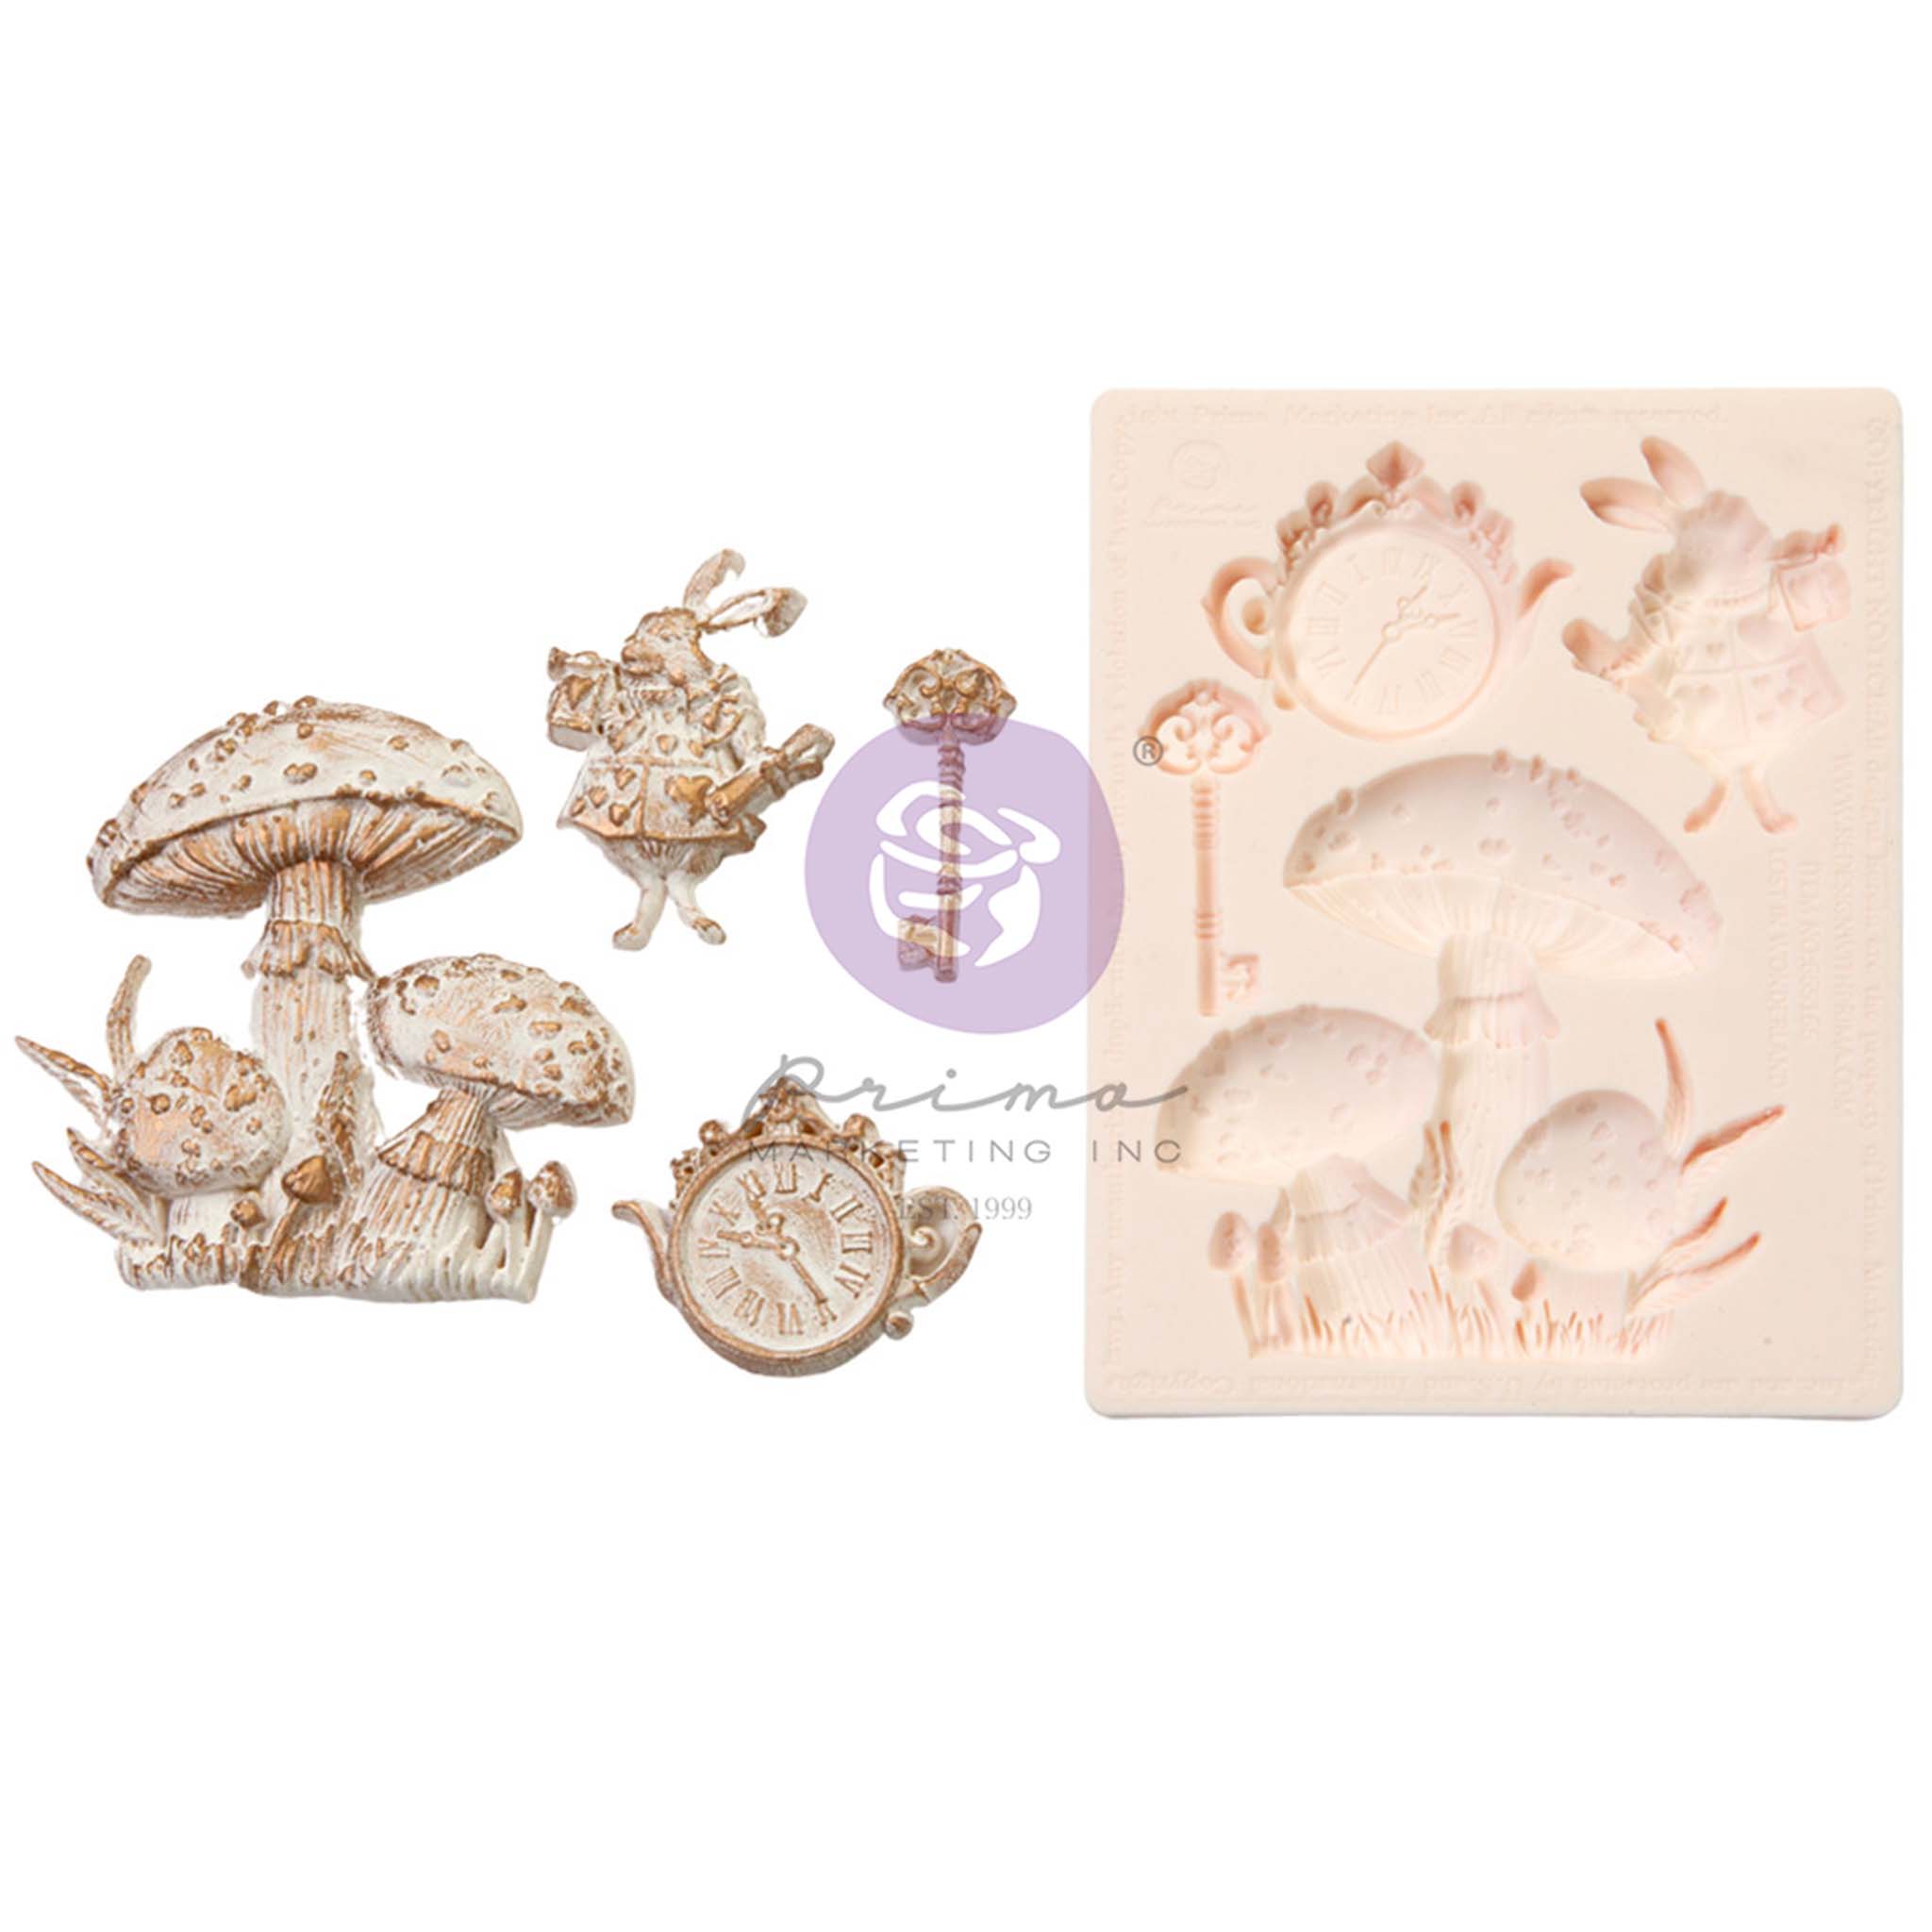 Gold and white colored silicone mold castings and a beige silicone mold of Prima Marketing's Lost in Wonderland are against a white background. This mold features a teapot pocket watch, the White Rabbit, a vintage key, and a cluster of mushrooms.